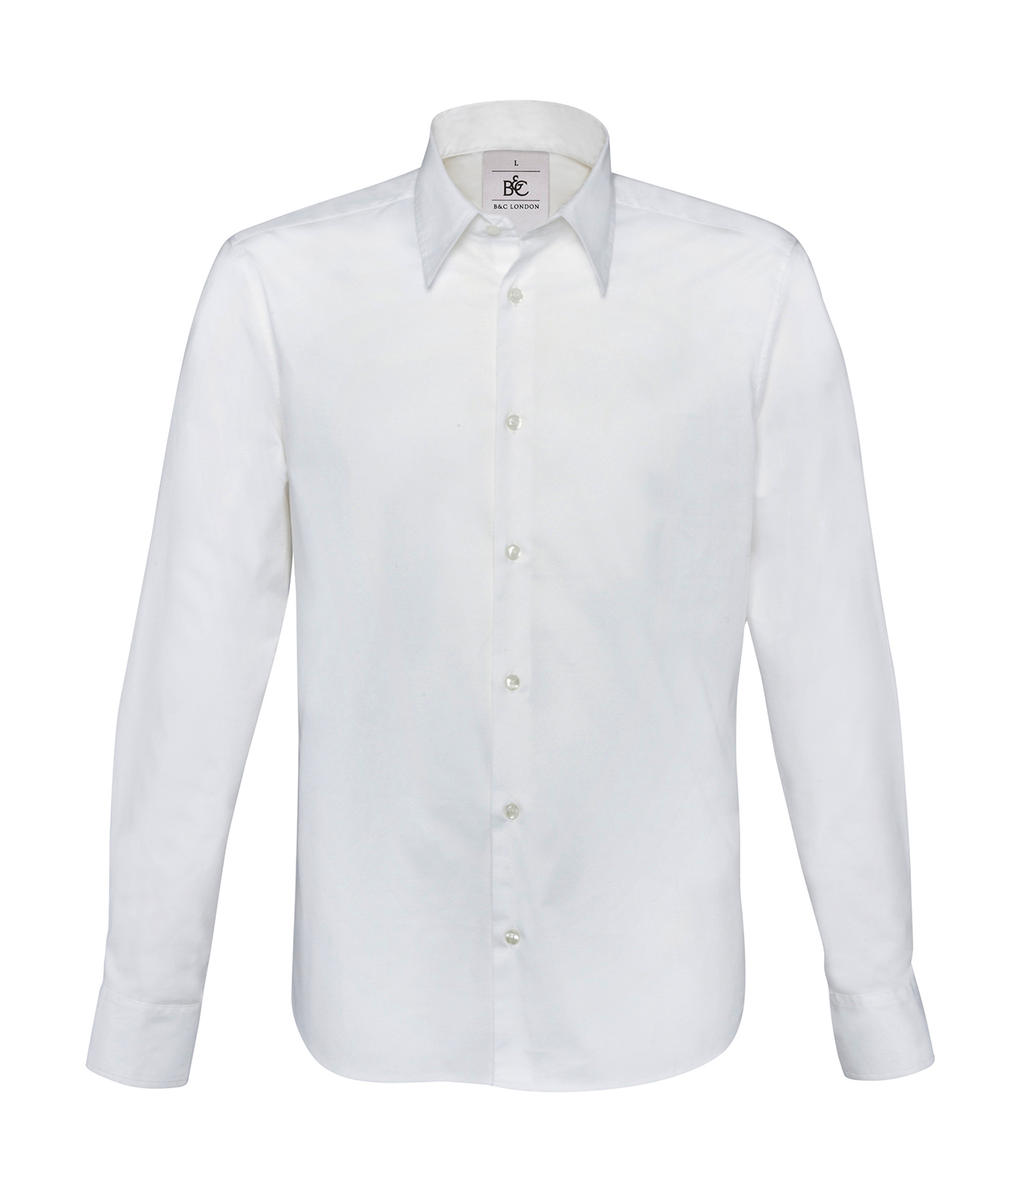  London Stretch Shirt LS in Farbe White